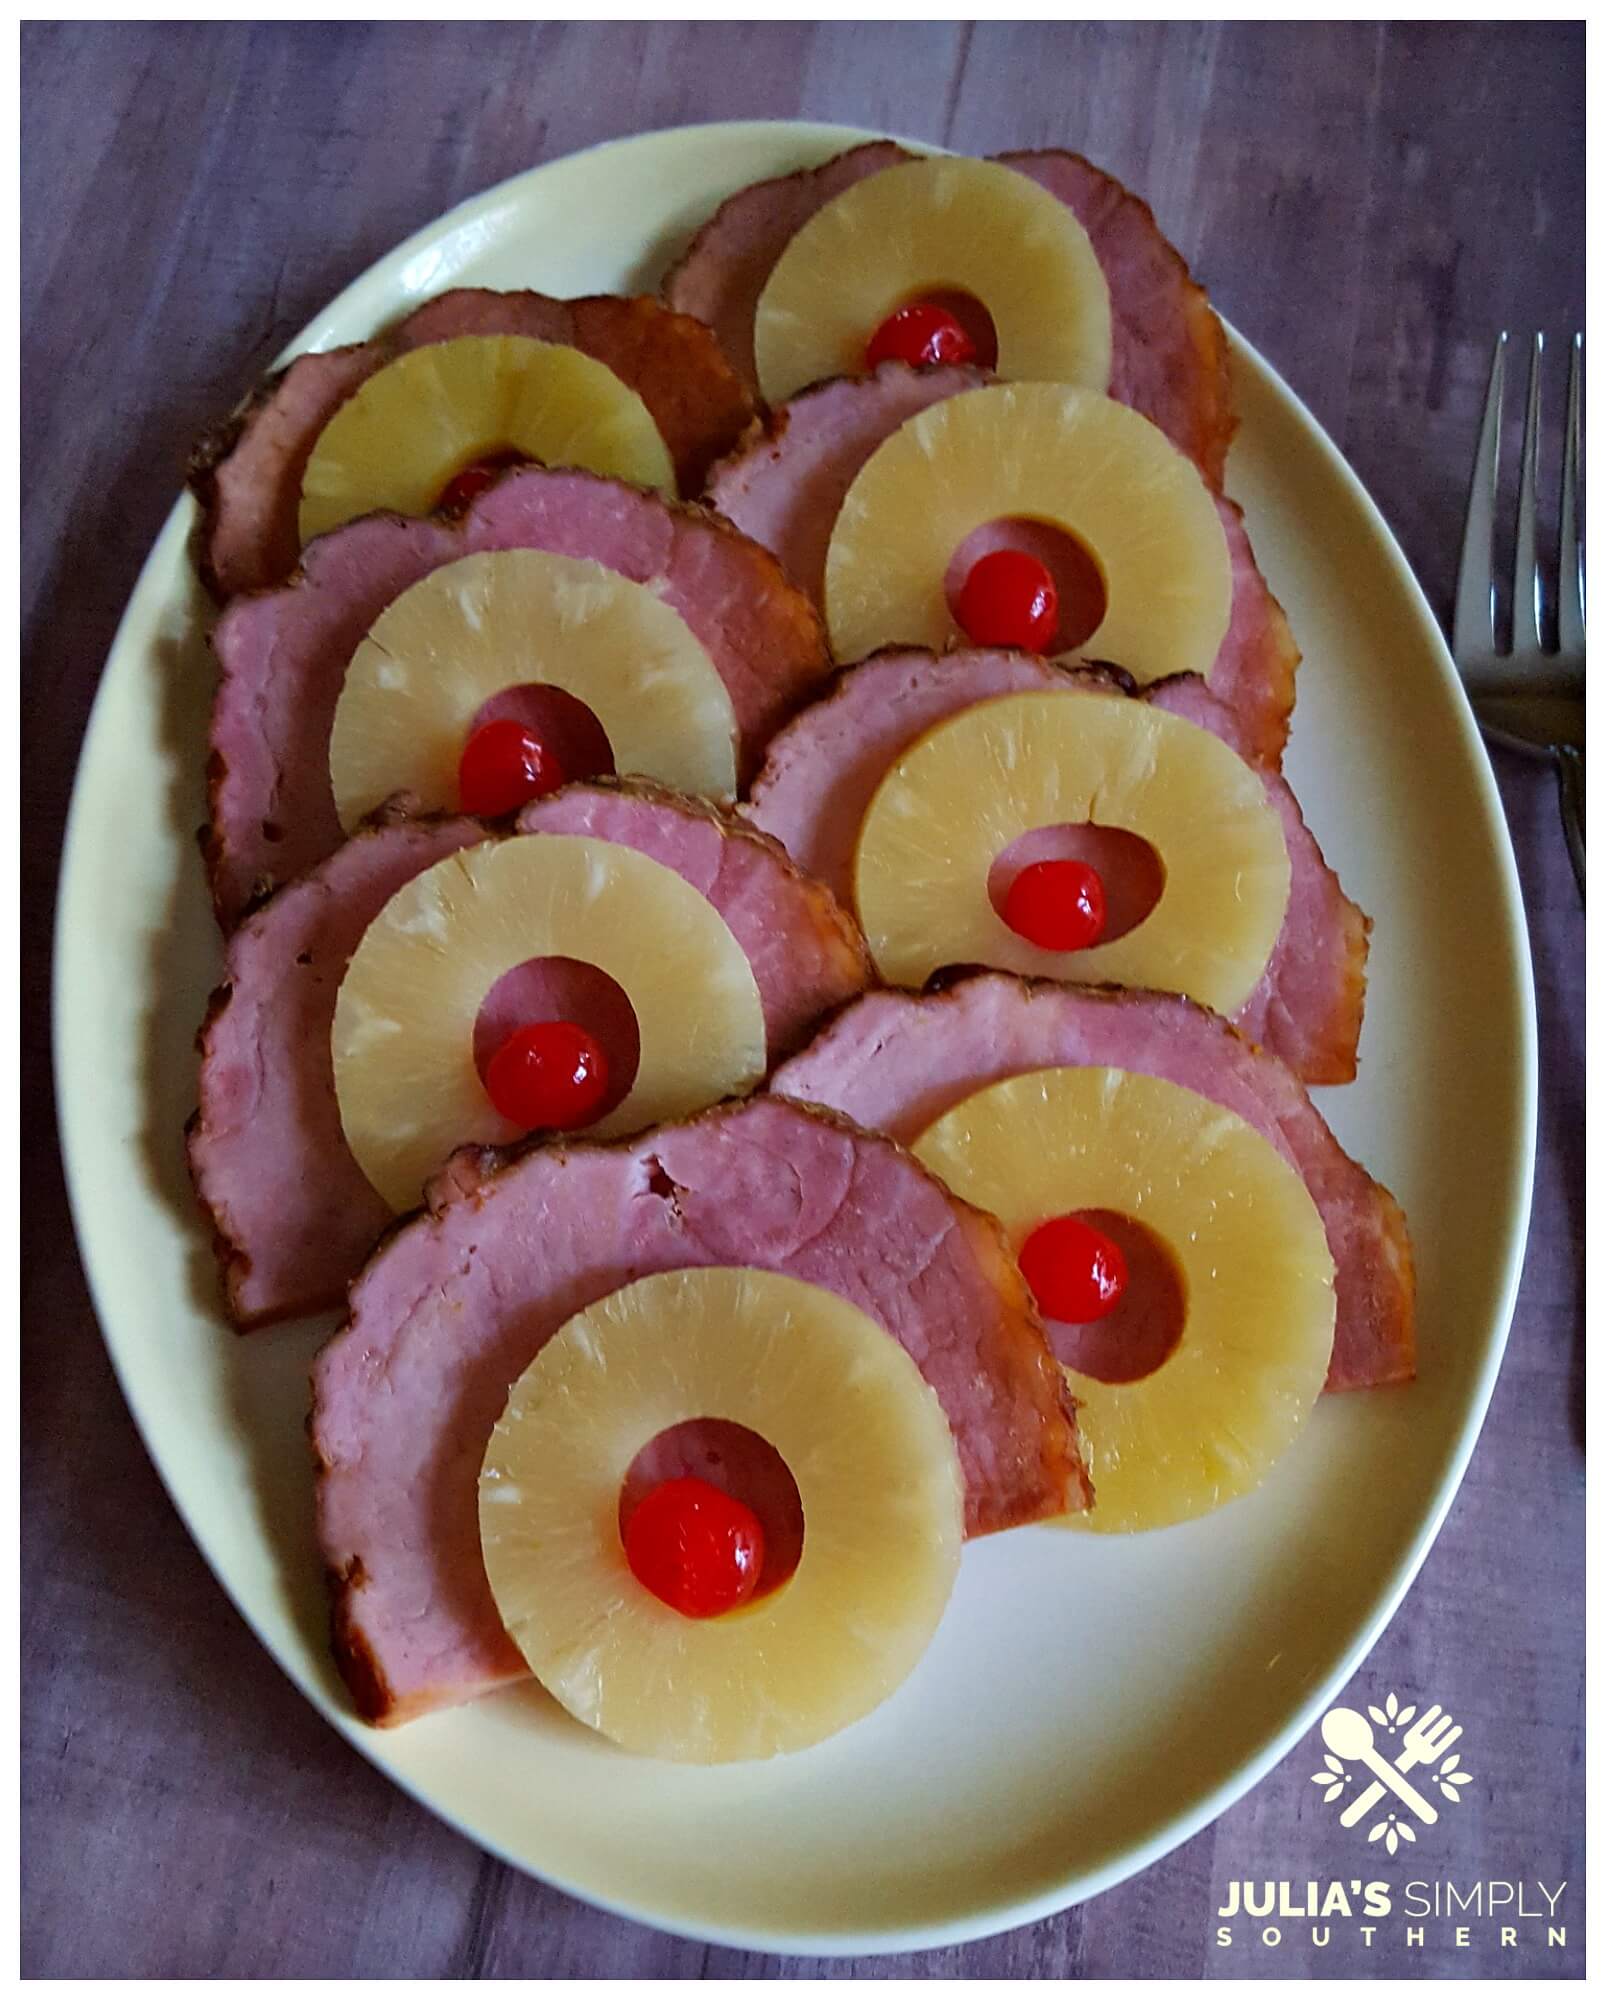 Oval platter with Thanksgiving ham slices topped with pineapple and cherries